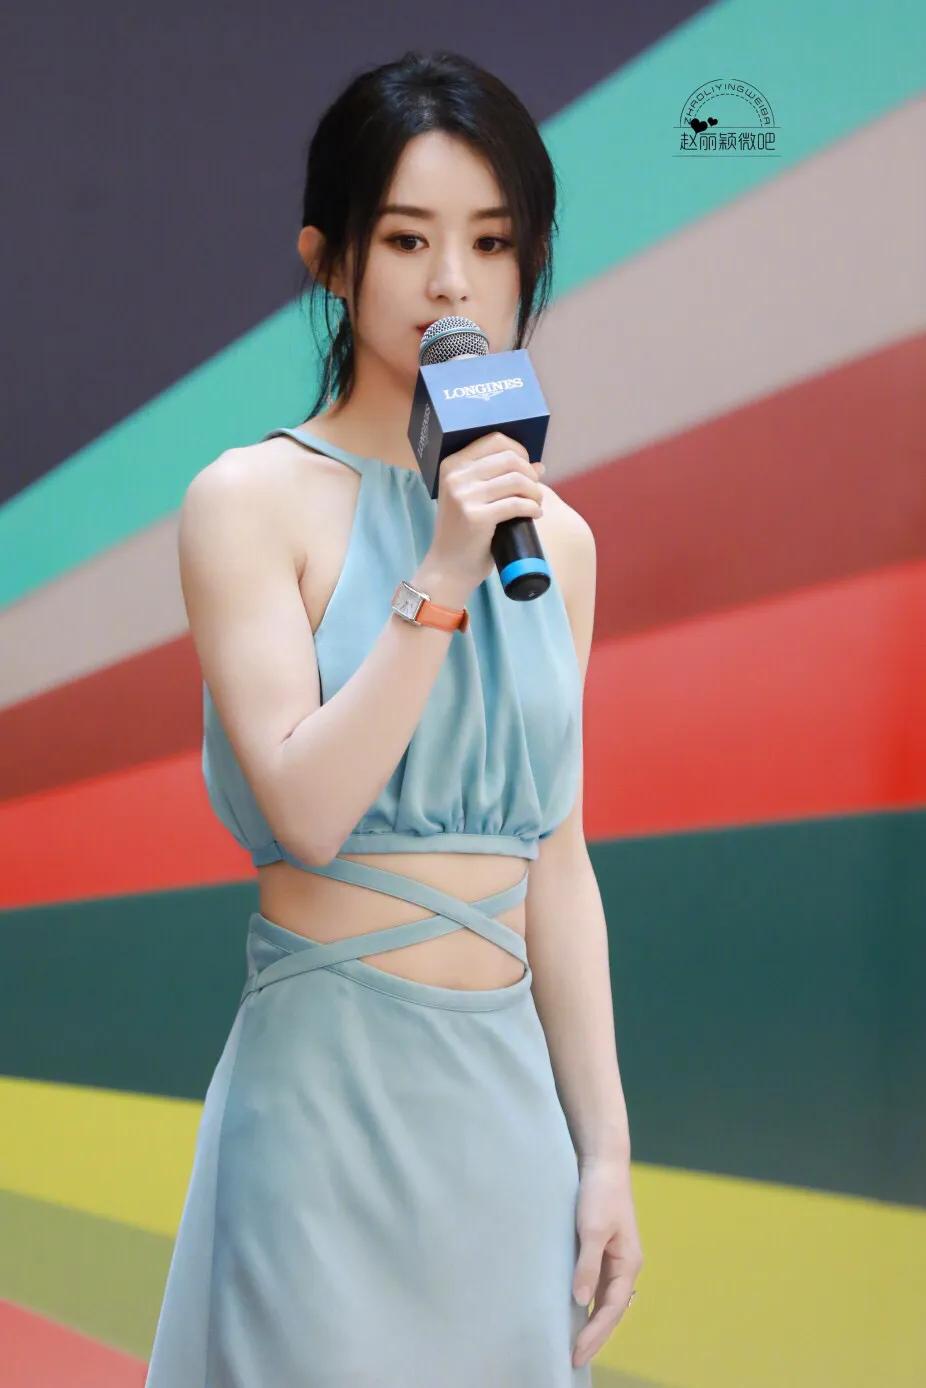 Zhao Liying Wears A Belly Skirt Too Pretty The Light Blue Makes The Skin Look So Pure INEWS